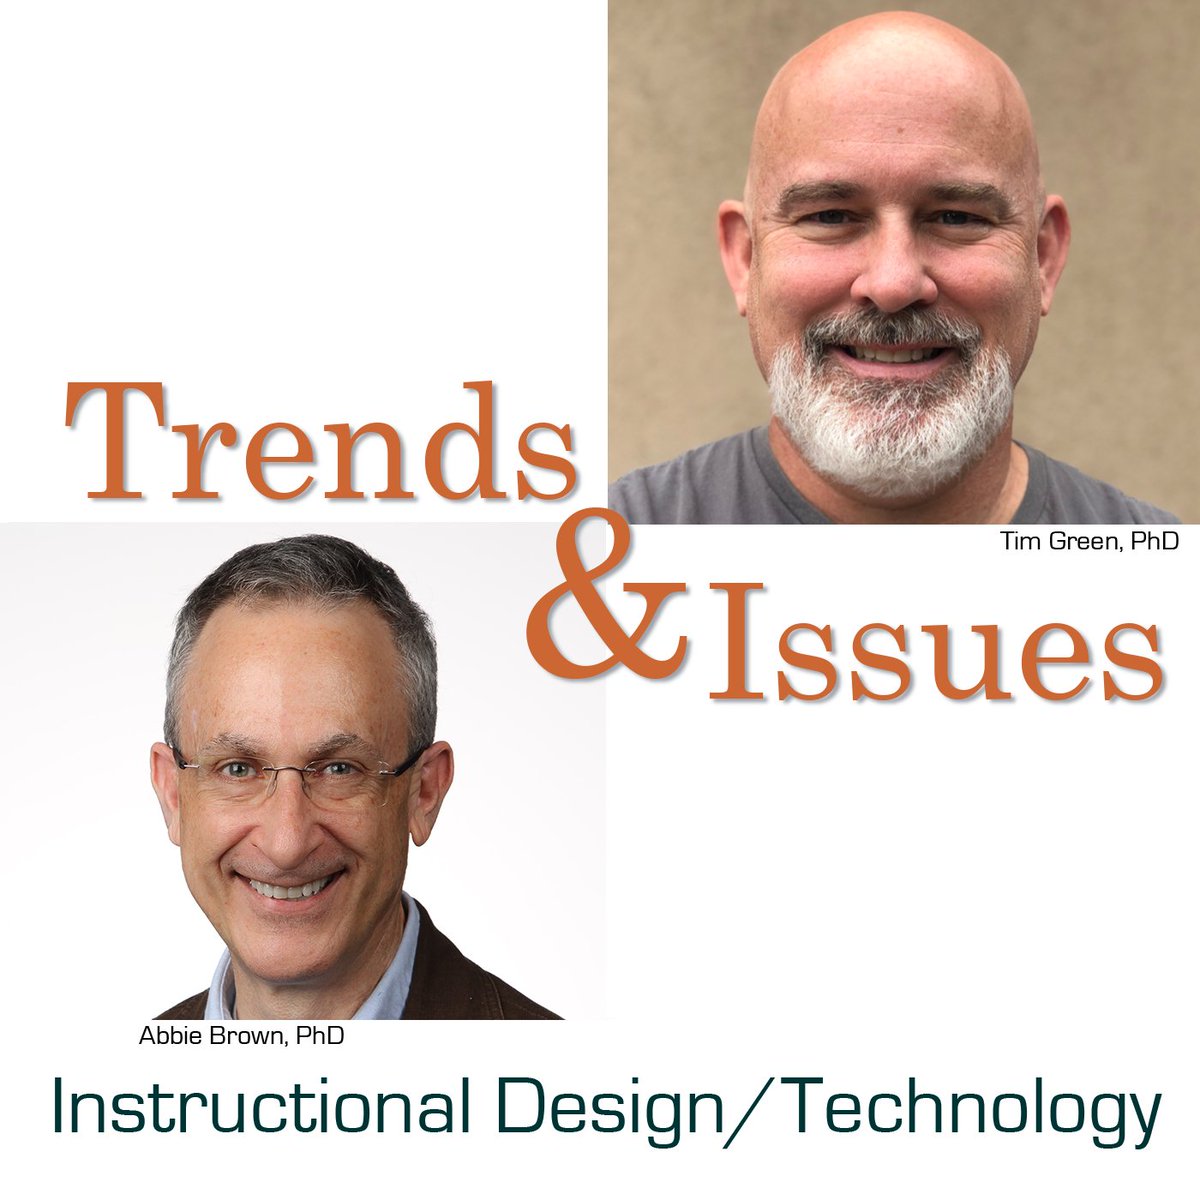 Podcast Episode 218: Your 14-minute audio update of instructional design/technology news from the past two weeks - @theedtechdoctor #edtech #education bit.ly/3fdhs4g